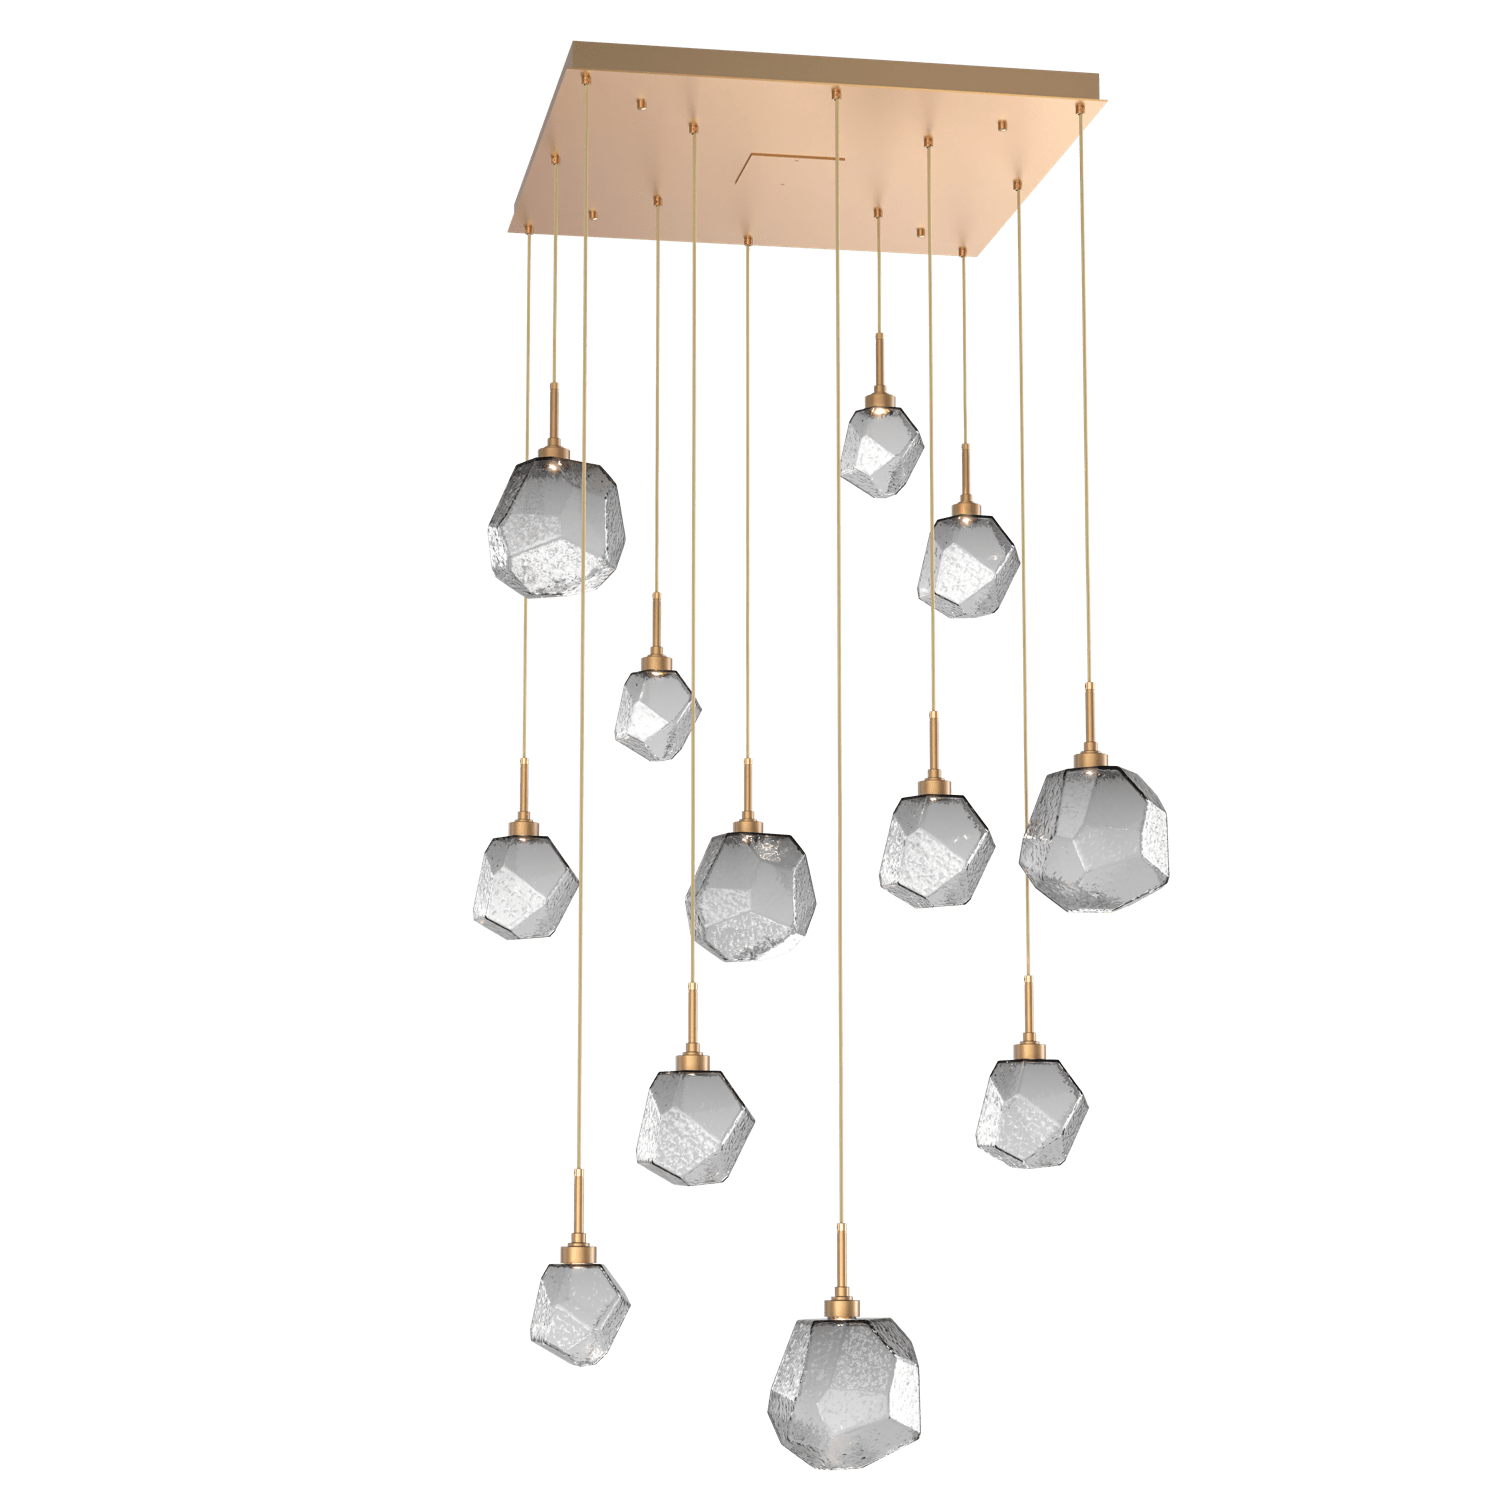 CHB0039-12-NB-S-Hammerton-Studio-Gem-12-light-square-pendant-chandelier-with-novel-brass-finish-and-smoke-blown-glass-shades-and-LED-lamping